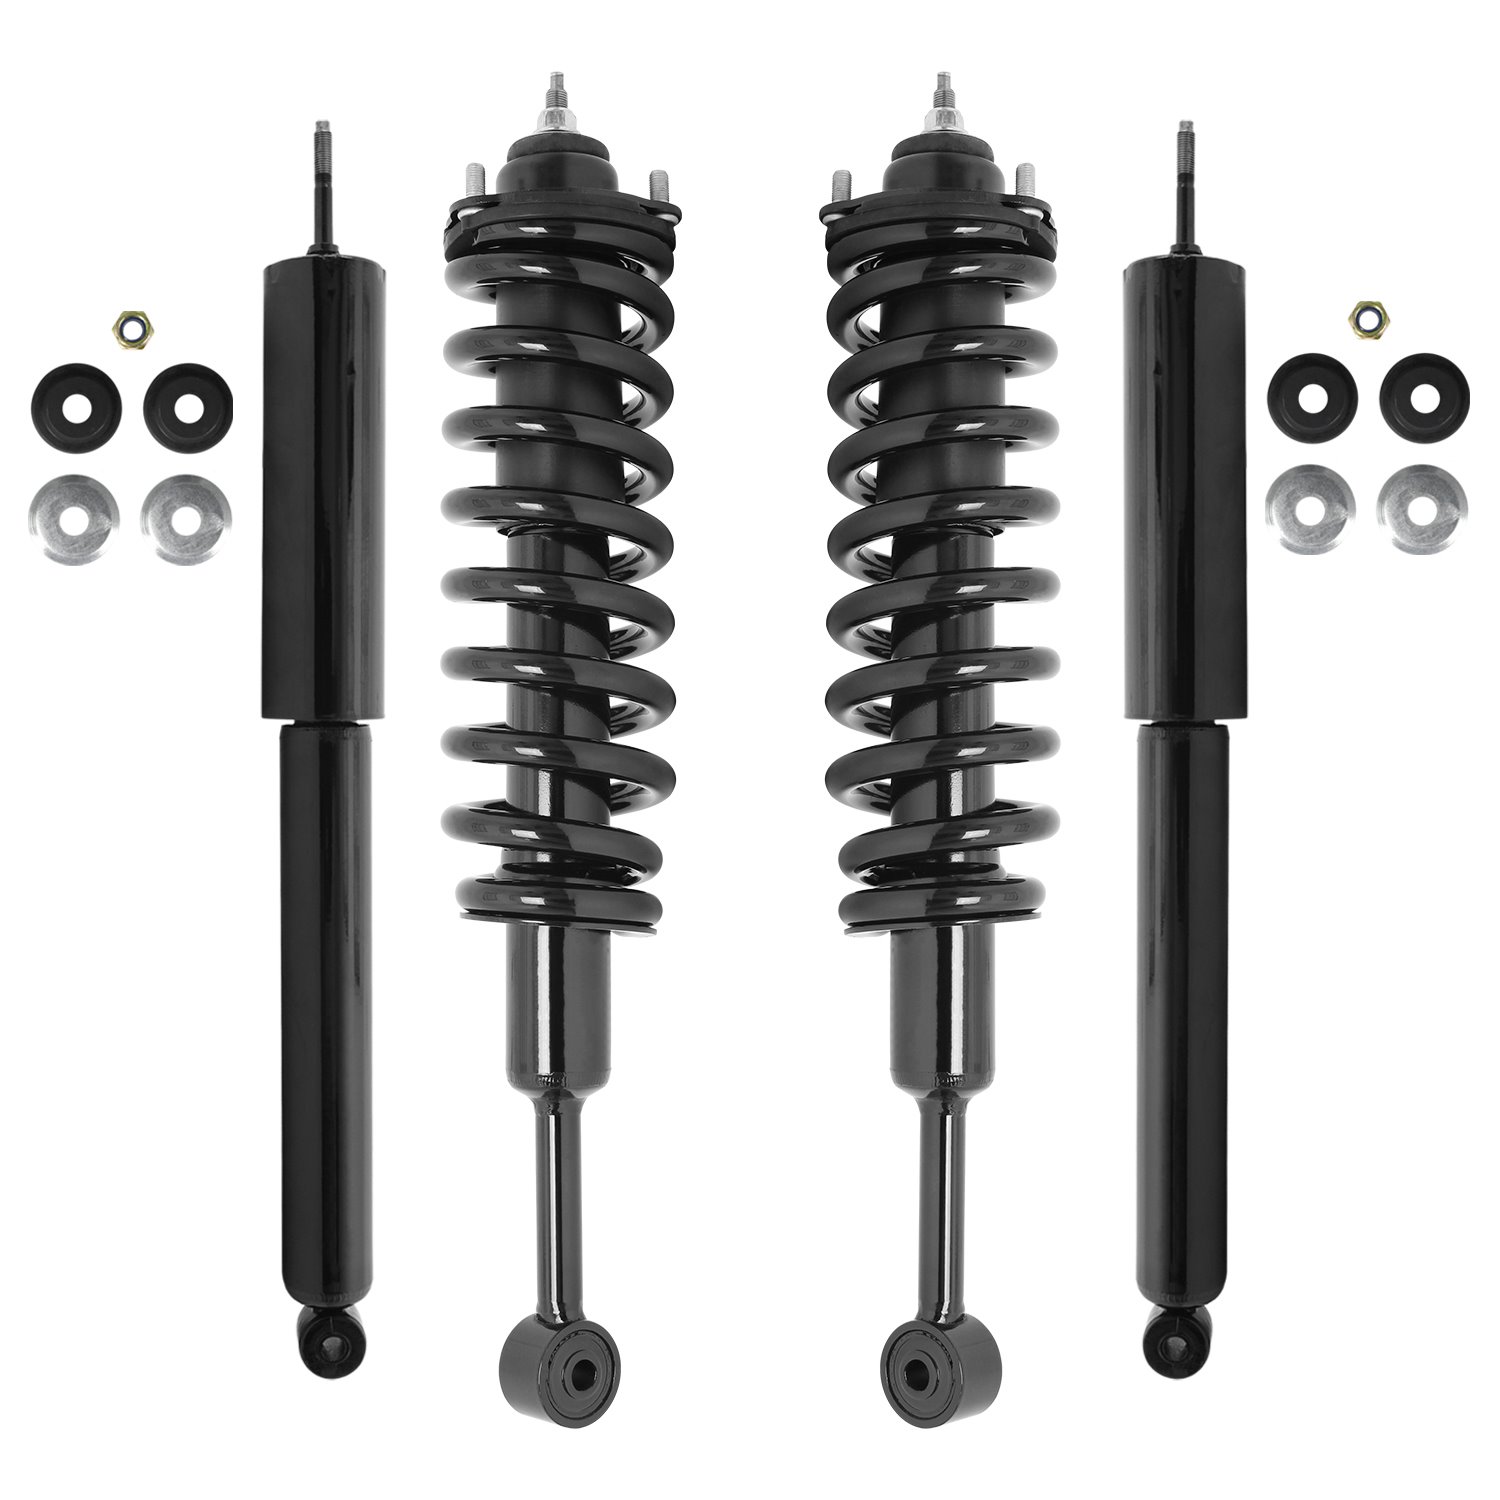 4-11563-254070-001 Front & Rear Suspension Strut & Coil Spring Assembly Fits Select Toyota Tacoma